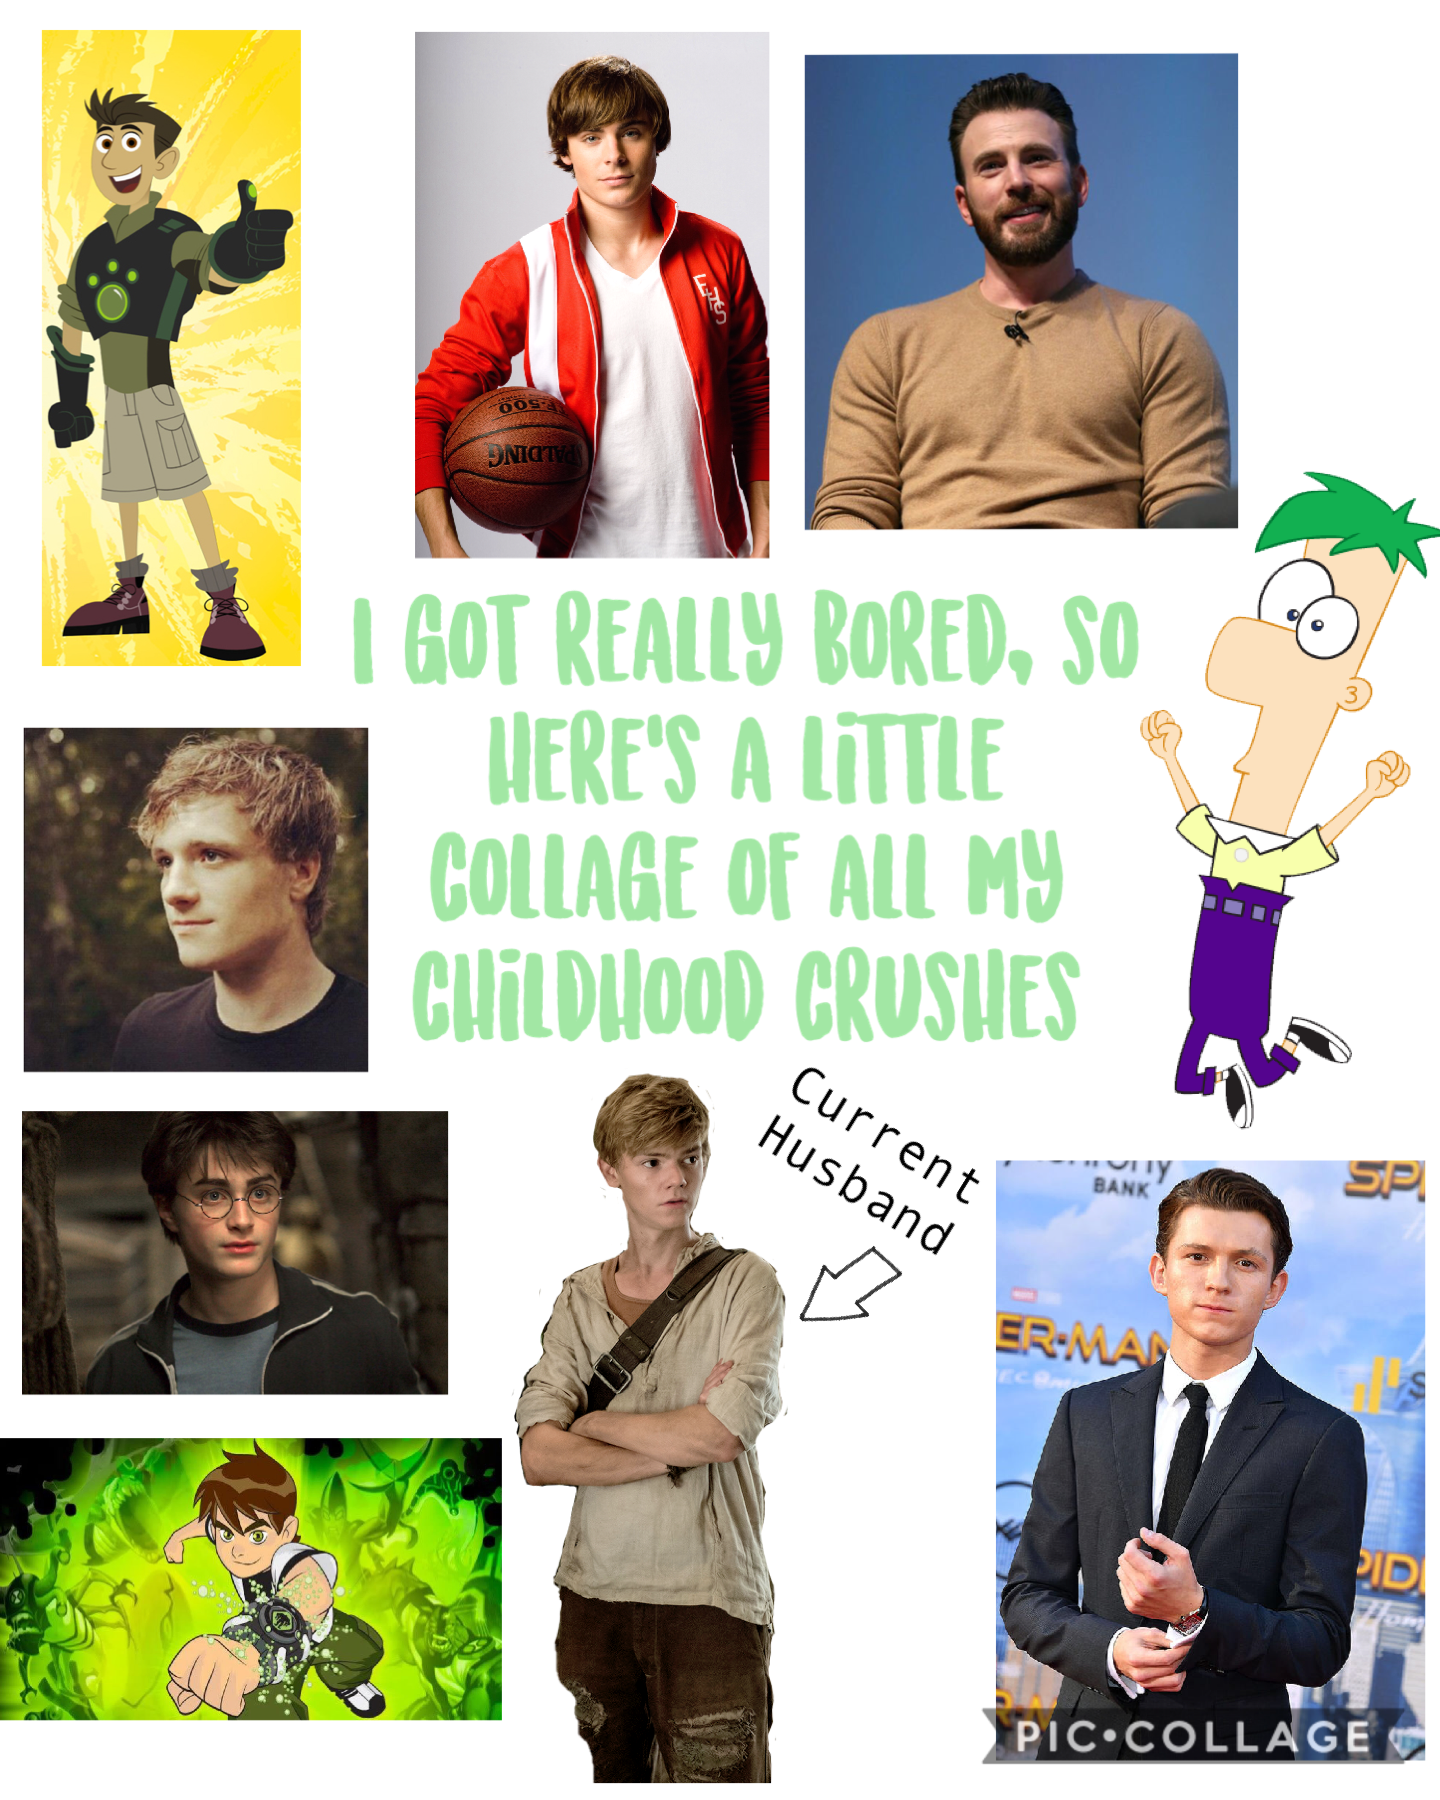 From top left corner to bottom right: Chris from Wild Kratts, Troy Bolten from HSM, Chris Evan’s (Captain America), Peeta Mellark from Hunger Games, Ferb from Phineas and Ferb, Harry Potter from the Prisoner of Azkaban, Newt from Maze Runner (my current h